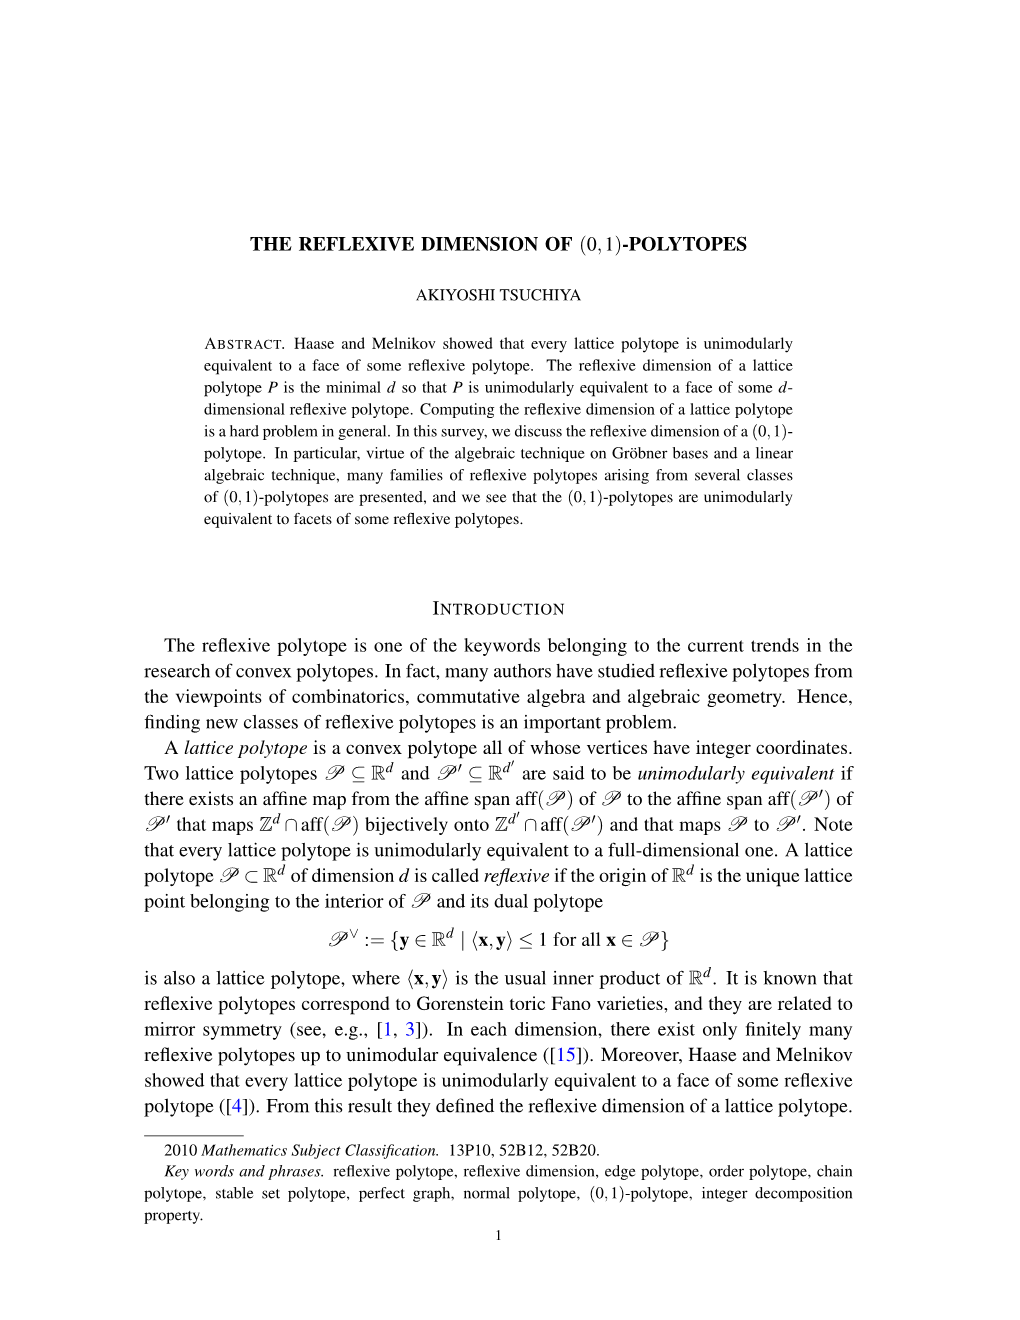 The Reflexive Dimension of (0,1)-Polytopes